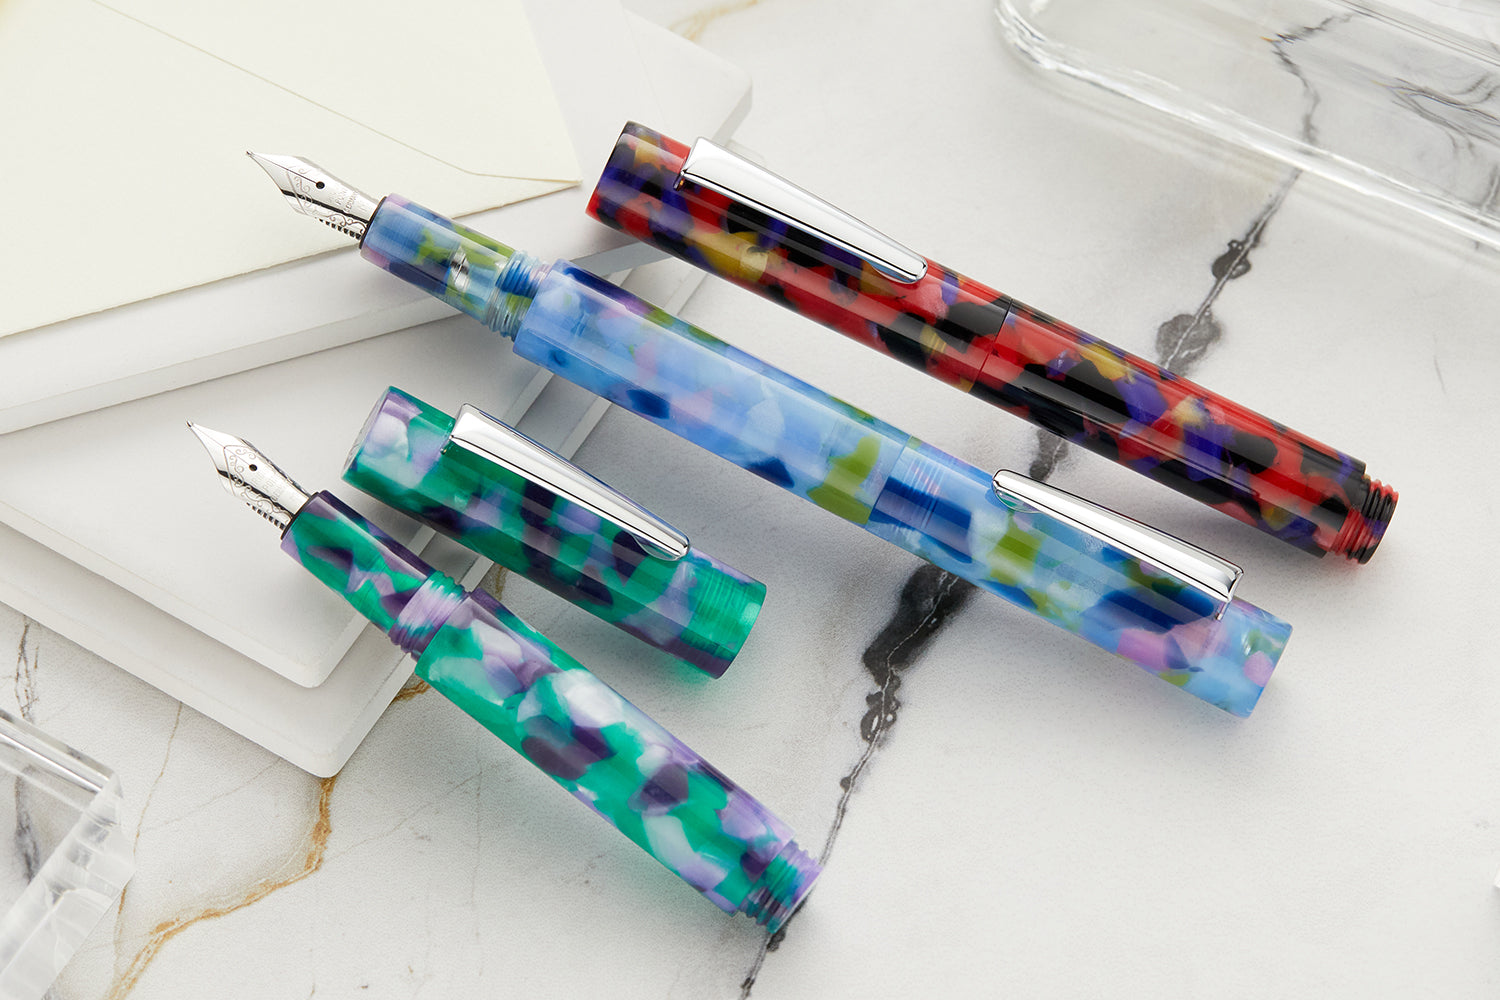 Monteverde MVP fountain pens, assorted colors on white notebook background